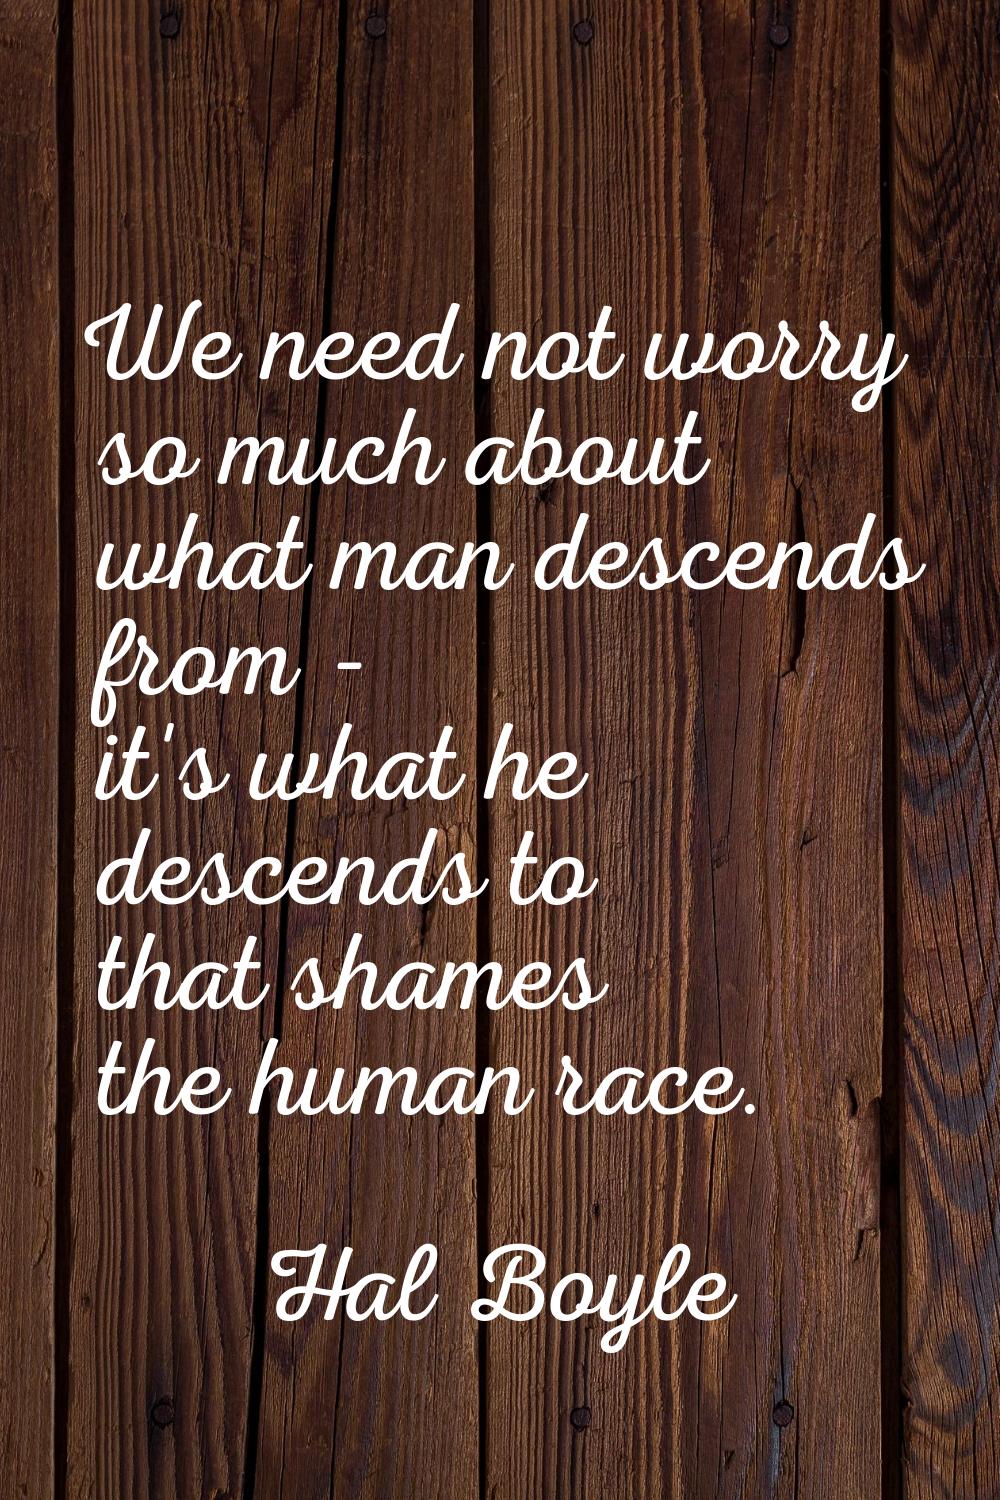 We need not worry so much about what man descends from - it's what he descends to that shames the h